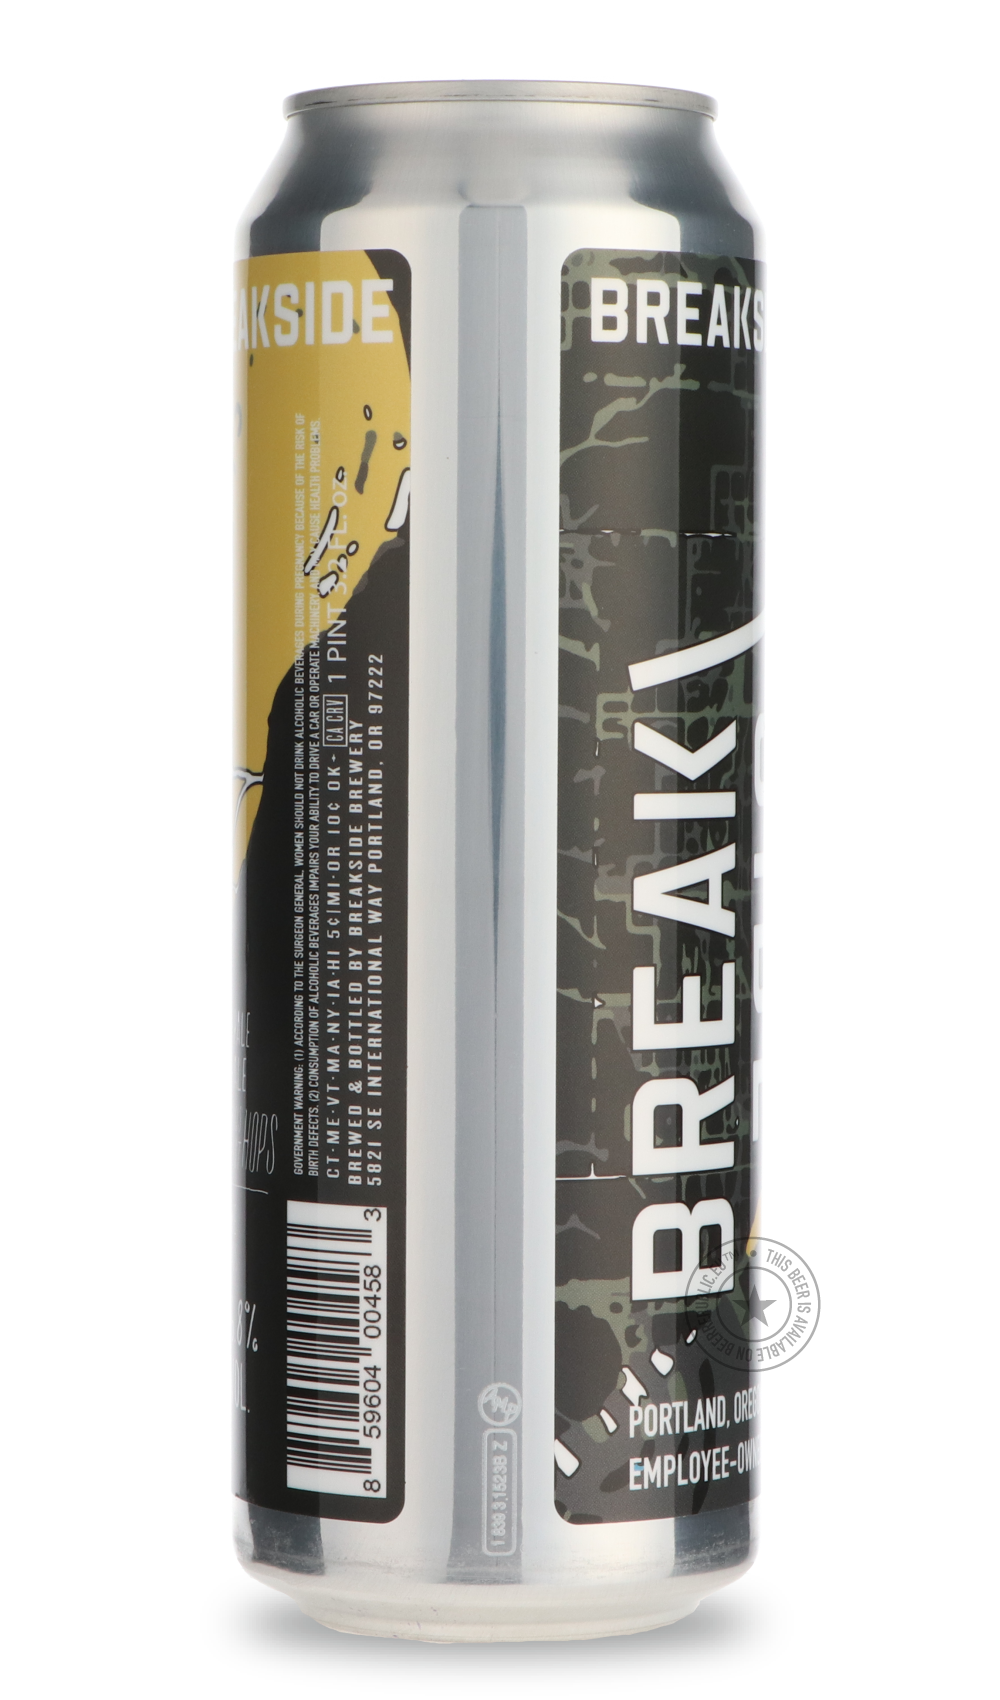 -Breakside- Breakside IPA-IPA- Only @ Beer Republic - The best online beer store for American & Canadian craft beer - Buy beer online from the USA and Canada - Bier online kopen - Amerikaans bier kopen - Craft beer store - Craft beer kopen - Amerikanisch bier kaufen - Bier online kaufen - Acheter biere online - IPA - Stout - Porter - New England IPA - Hazy IPA - Imperial Stout - Barrel Aged - Barrel Aged Imperial Stout - Brown - Dark beer - Blond - Blonde - Pilsner - Lager - Wheat - Weizen - Amber - Barley 